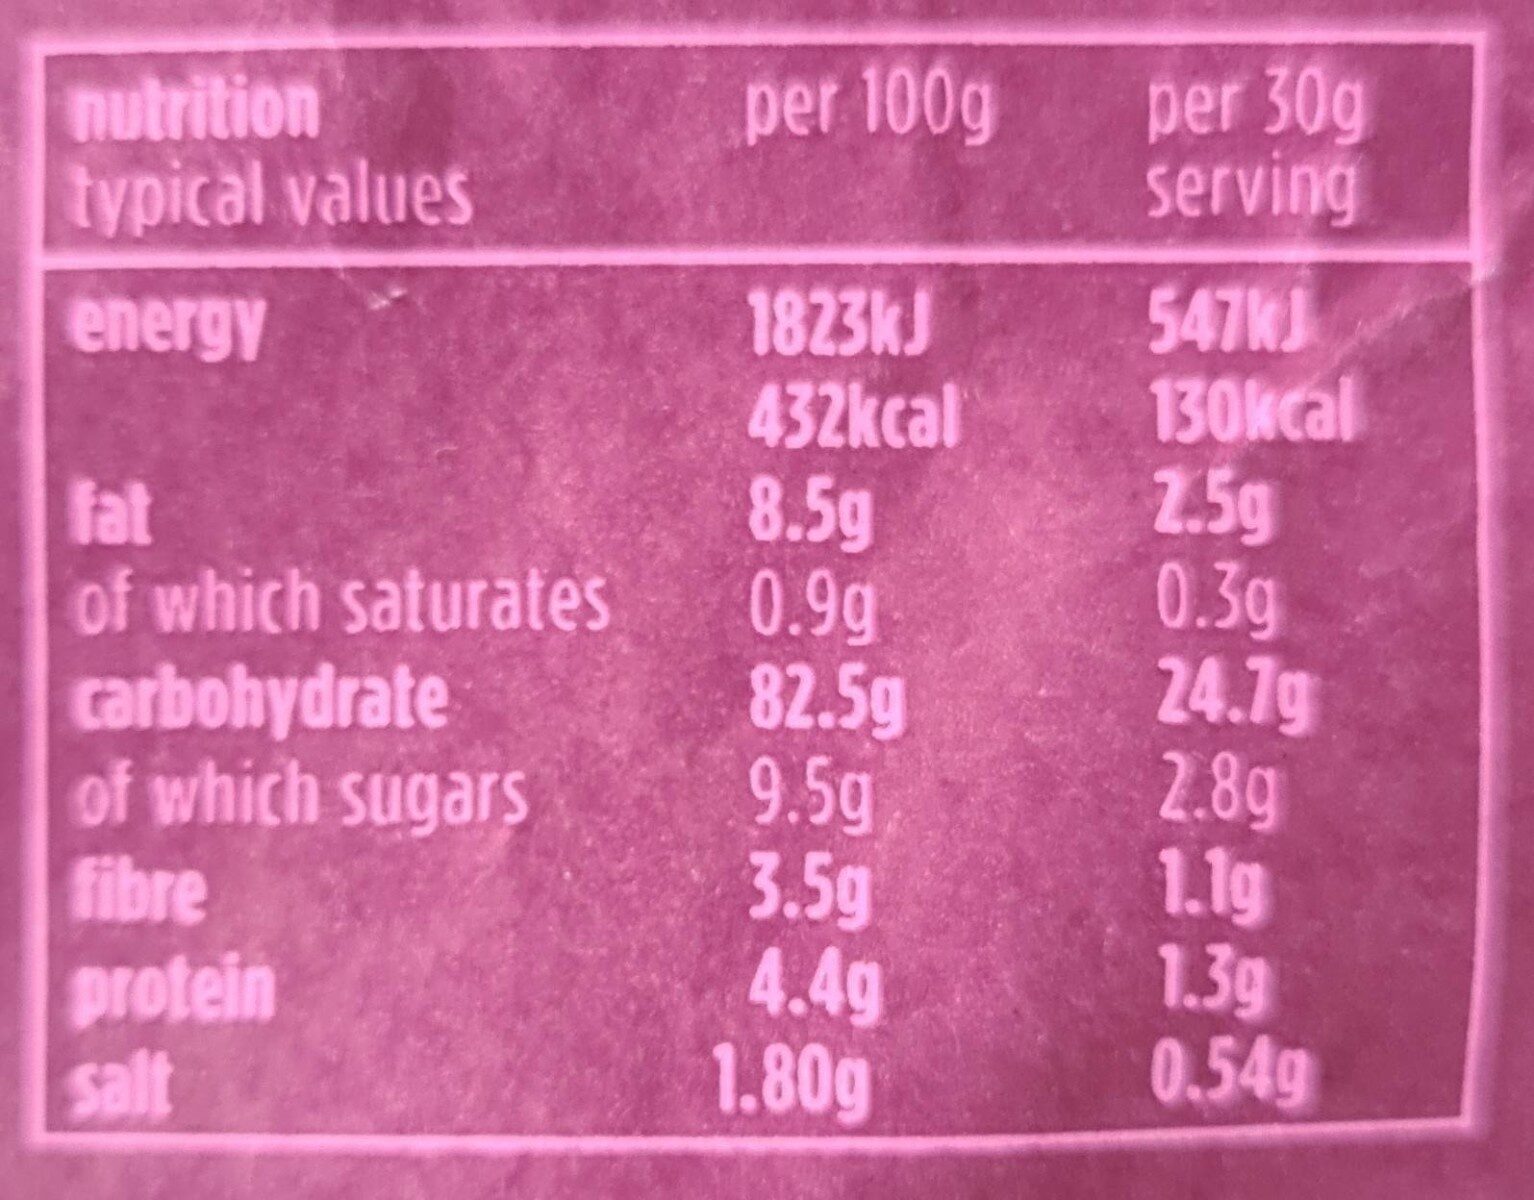 Baked behgie crackers - Nutrition facts